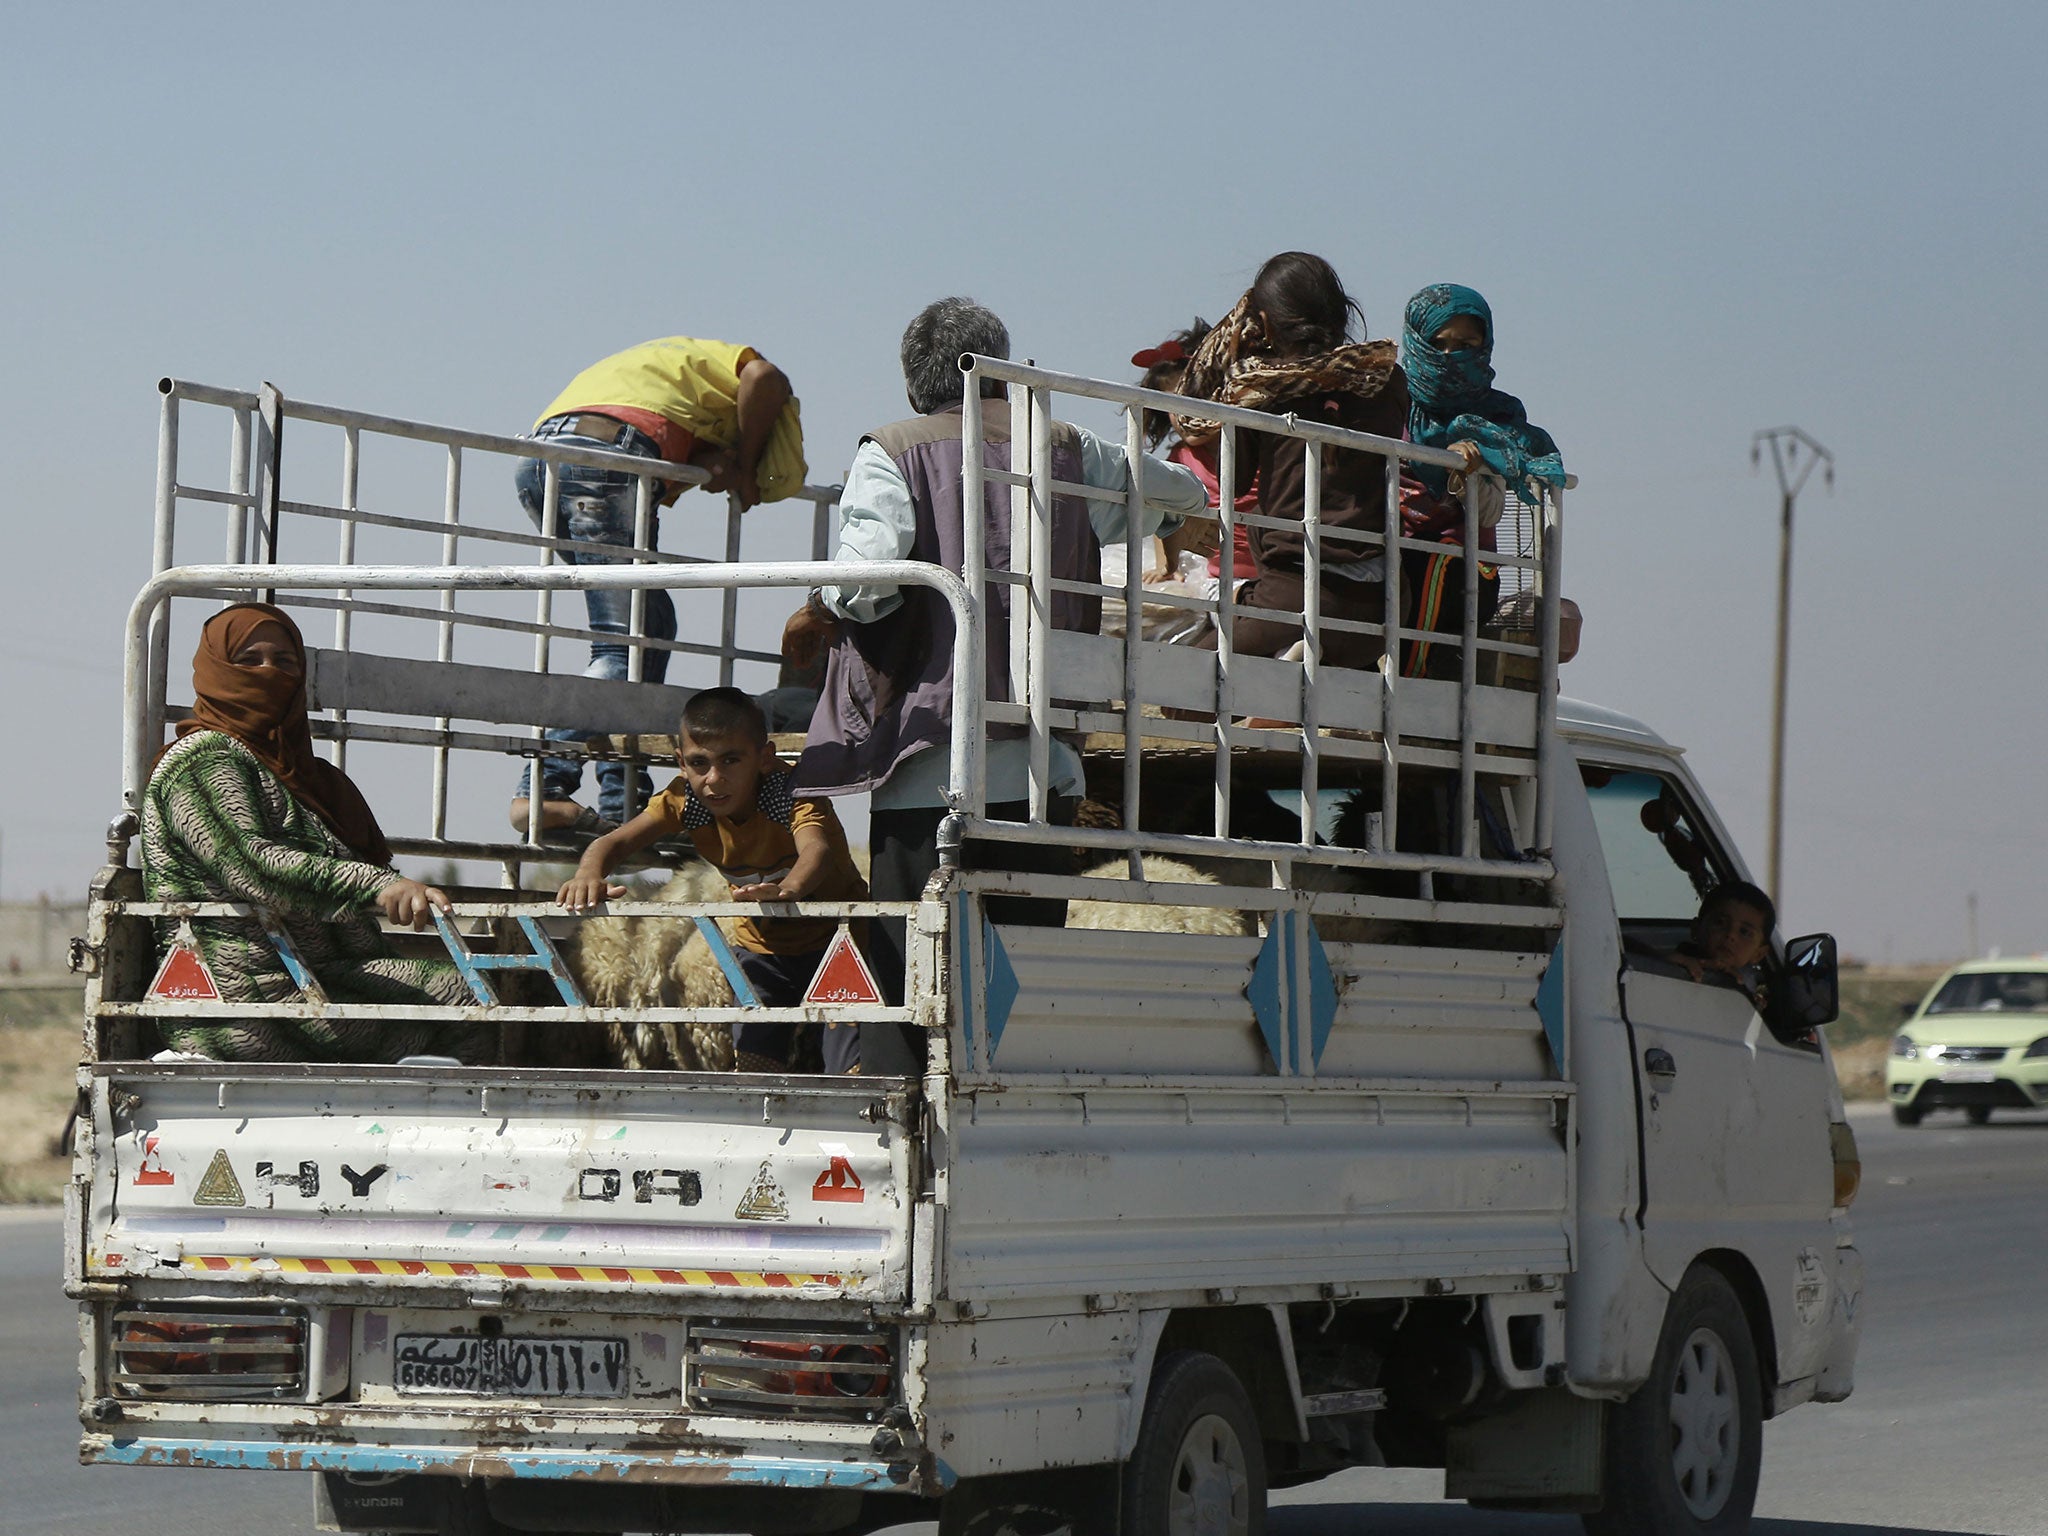 Kurdish civilians board a truck as they flee bombing in Hasakah, Syria, on 18 August